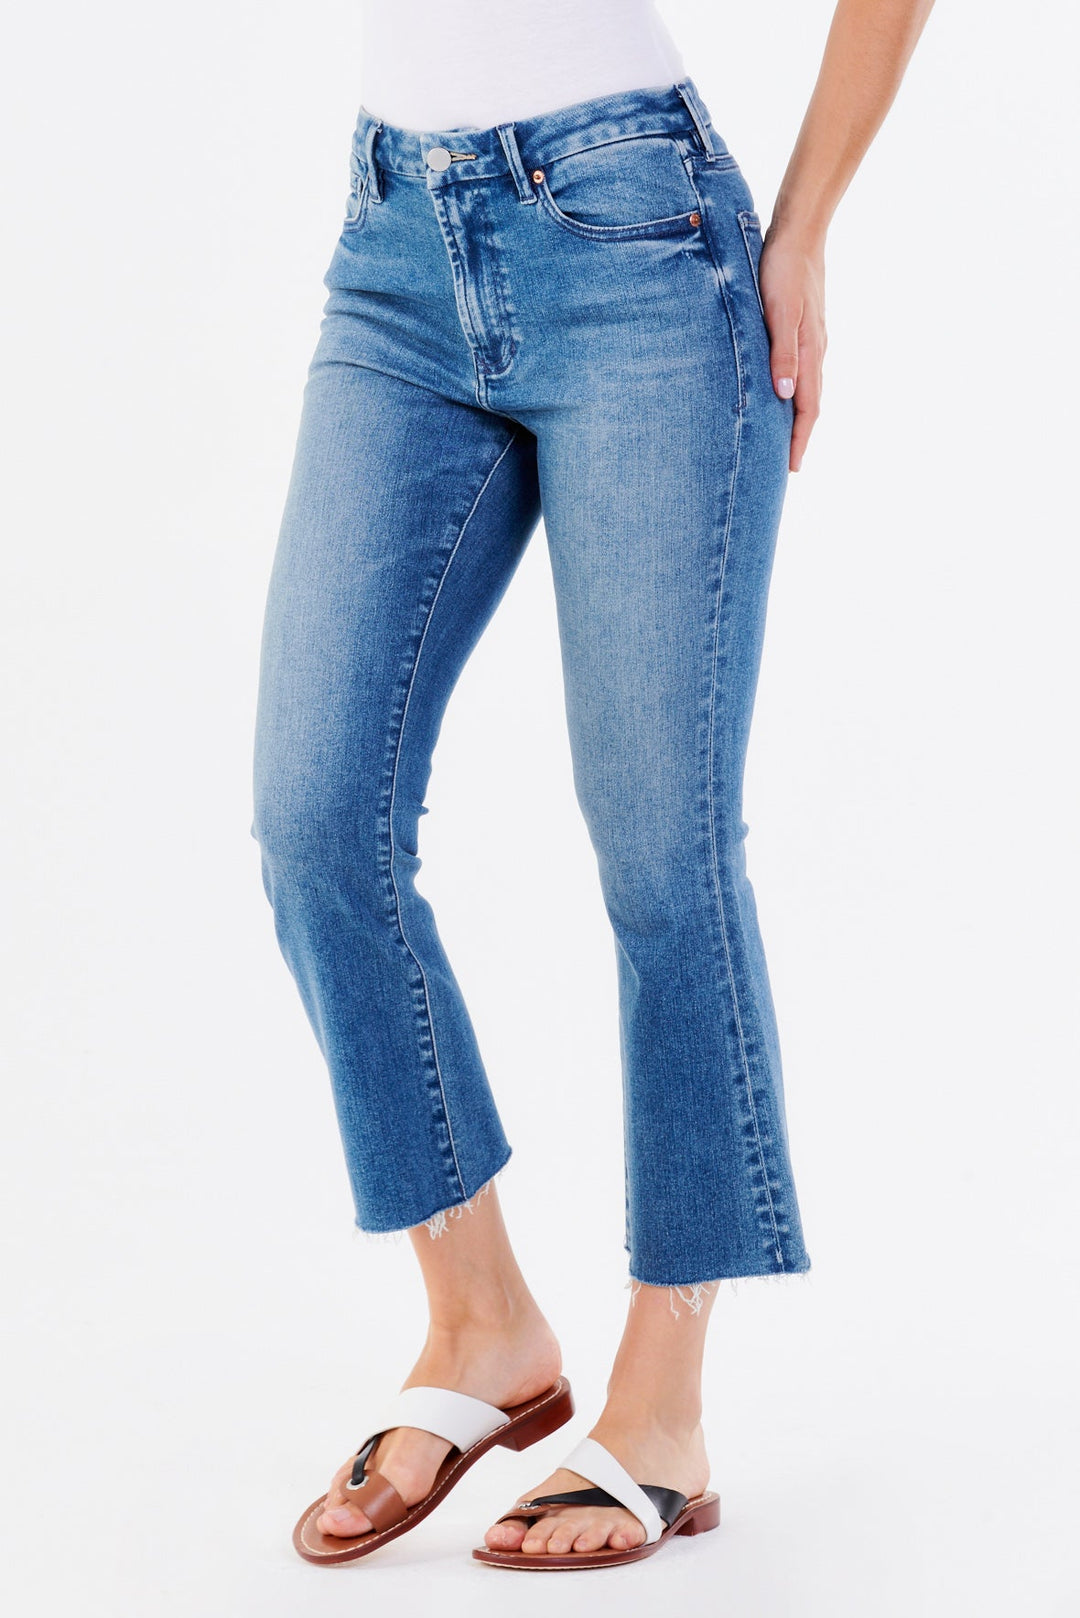 image of a female model wearing a JEANNE SUPER HIGH RISE CROPPED FLARE JEANS ESCAPE JEANS